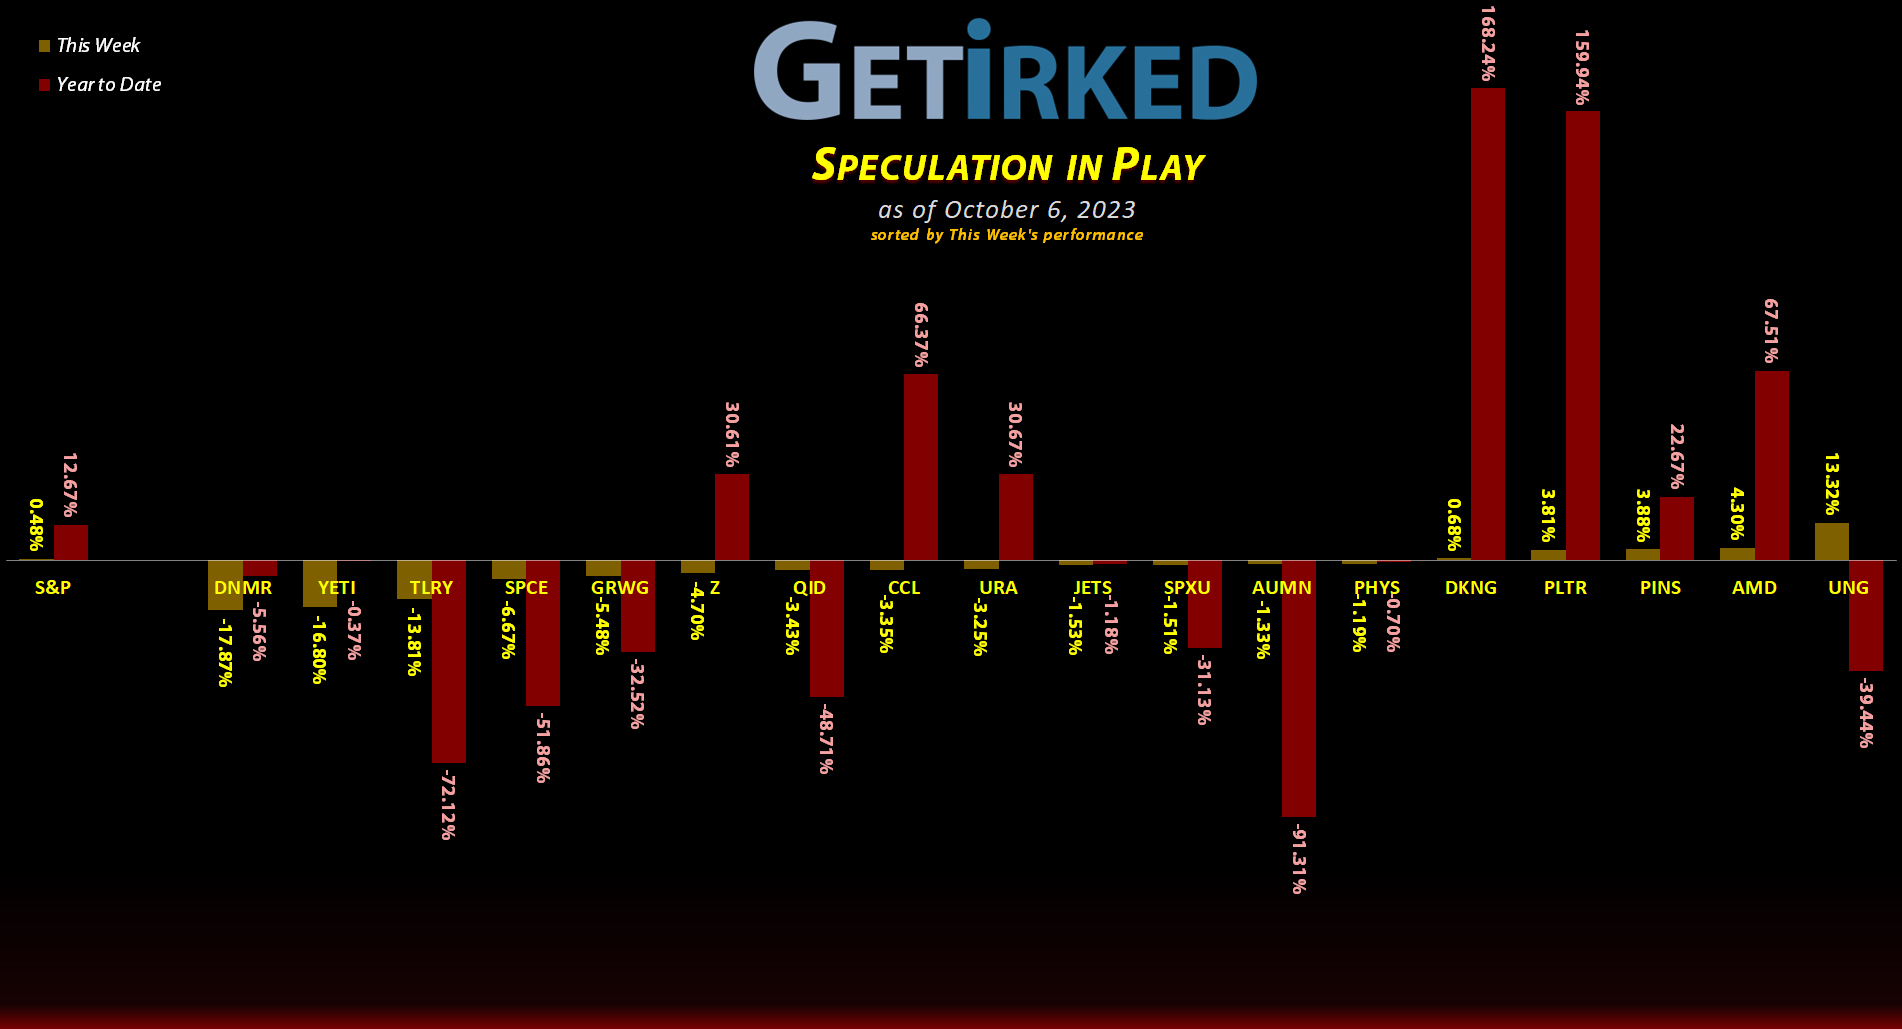 Get Irked's Speculation in Play - October 6, 2023